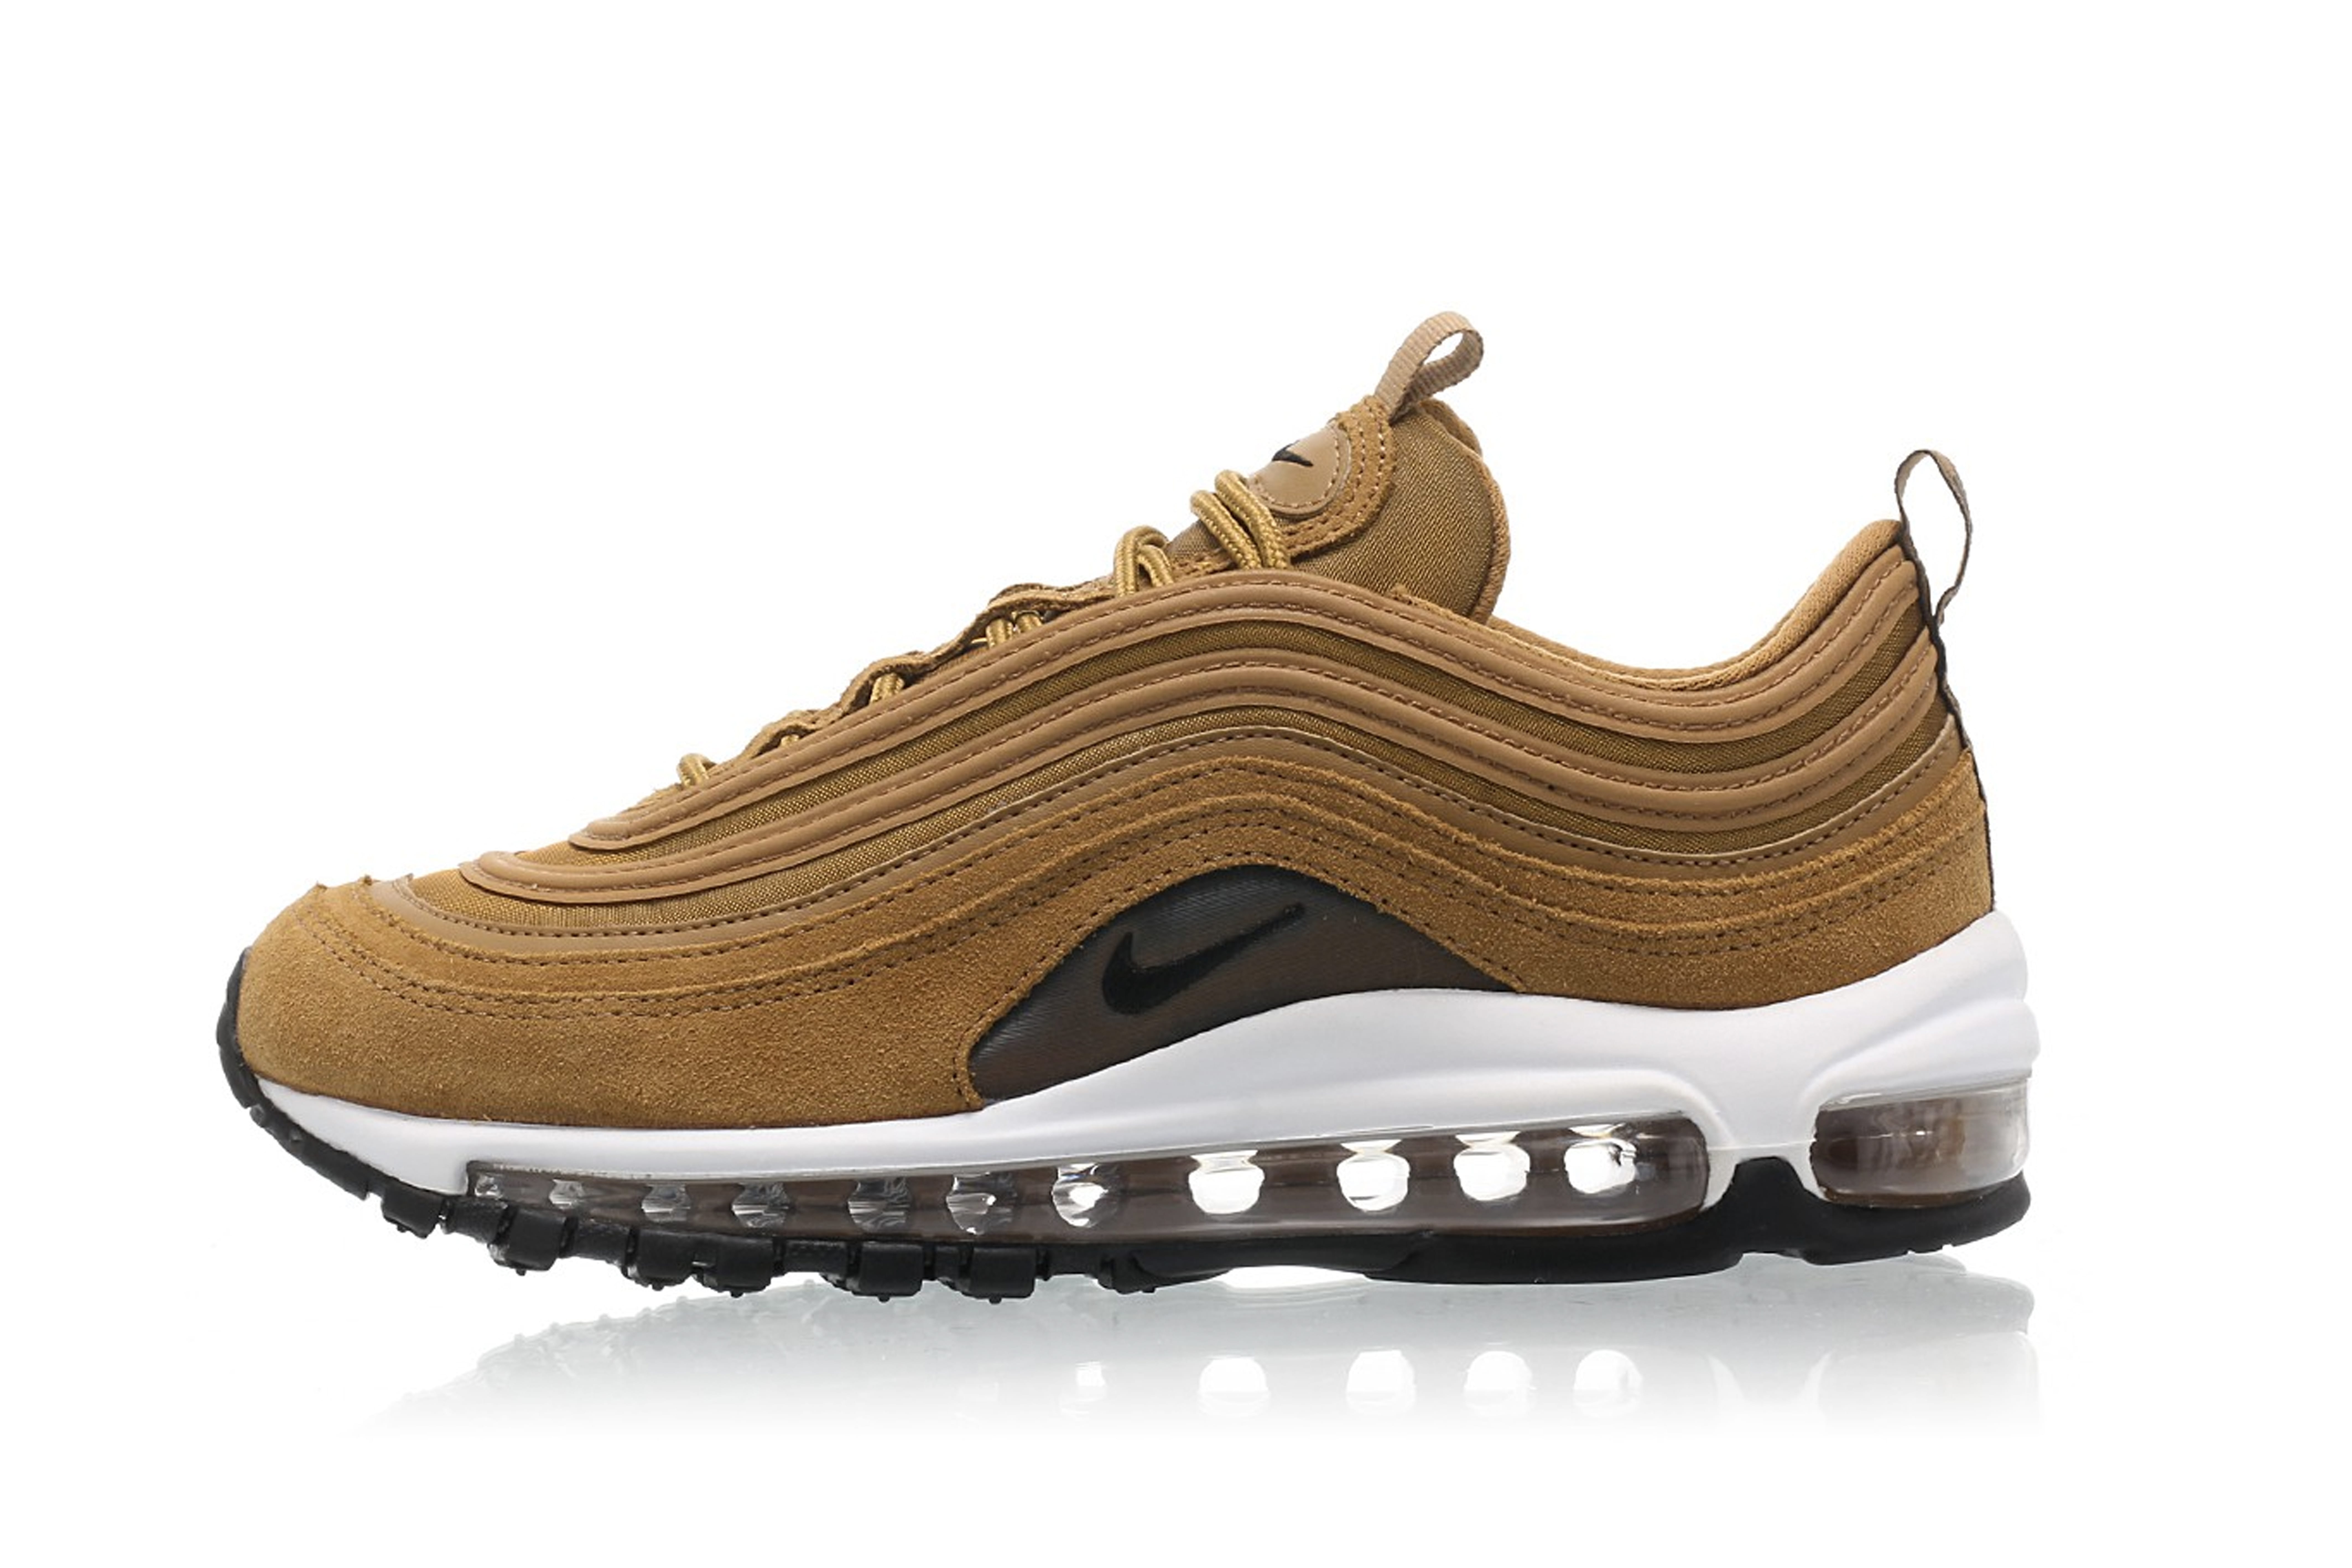 Nike Air Max 97 Arrives in a Suede 